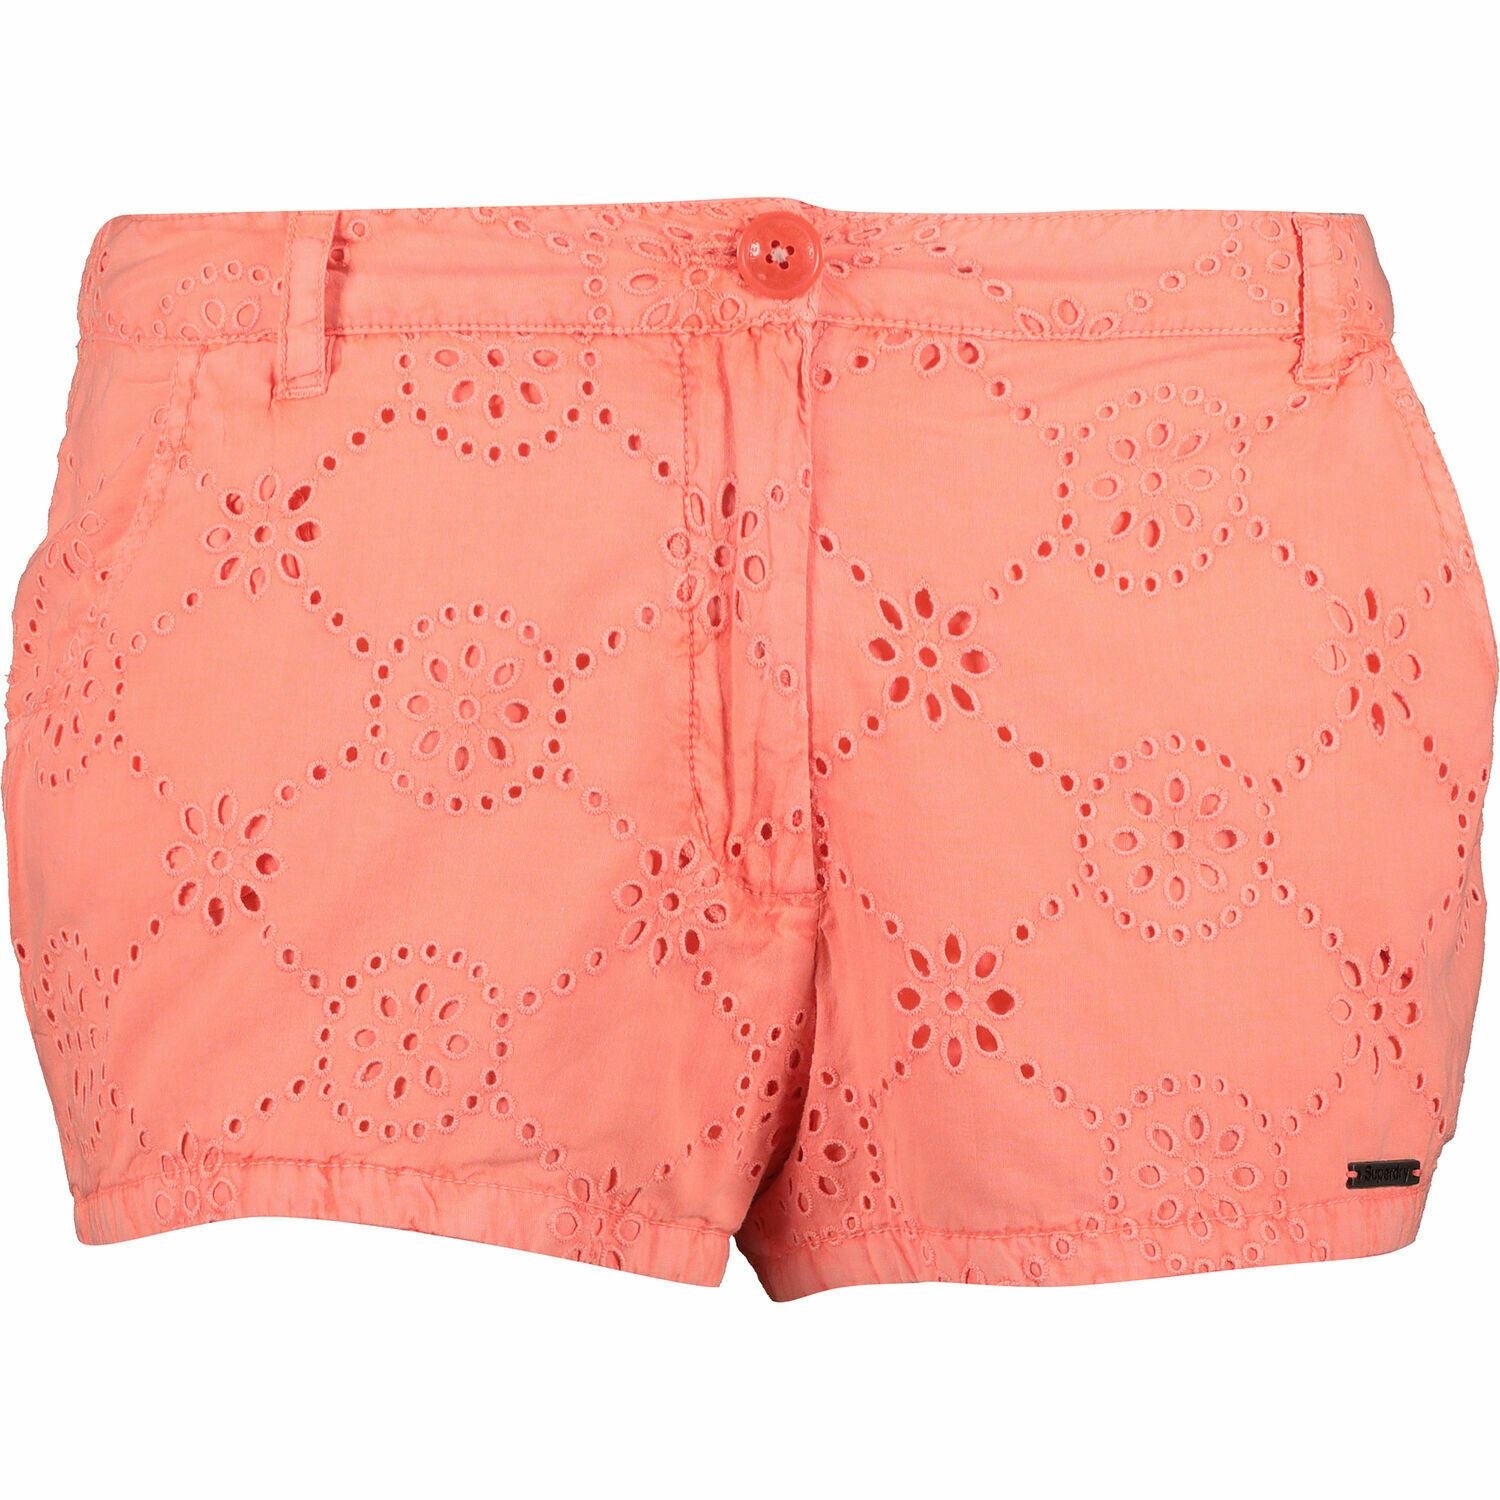 SUPERDRY Women's BRODERIE Chino Shorts, Fluro Coral, size XS - UK 8